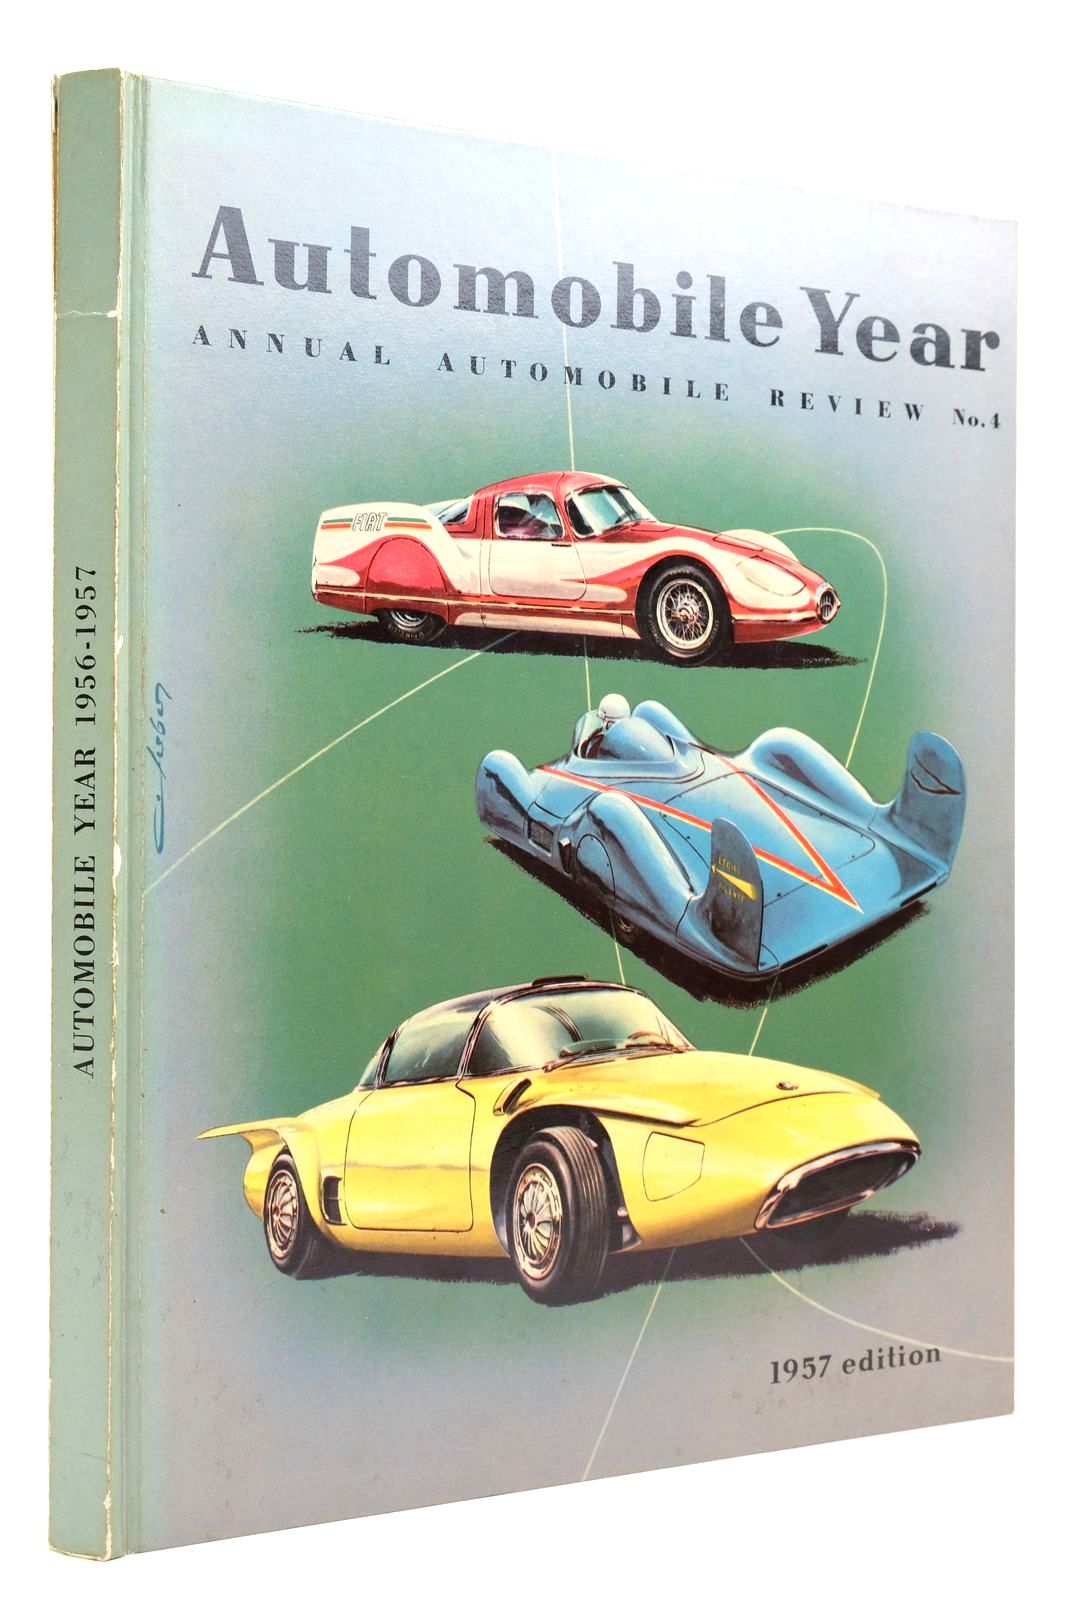 Photo of AUTOMOBILE YEAR 1956-1957 ANNUAL AUTOMOBILE REVIEW No. 4- Stock Number: 2140280